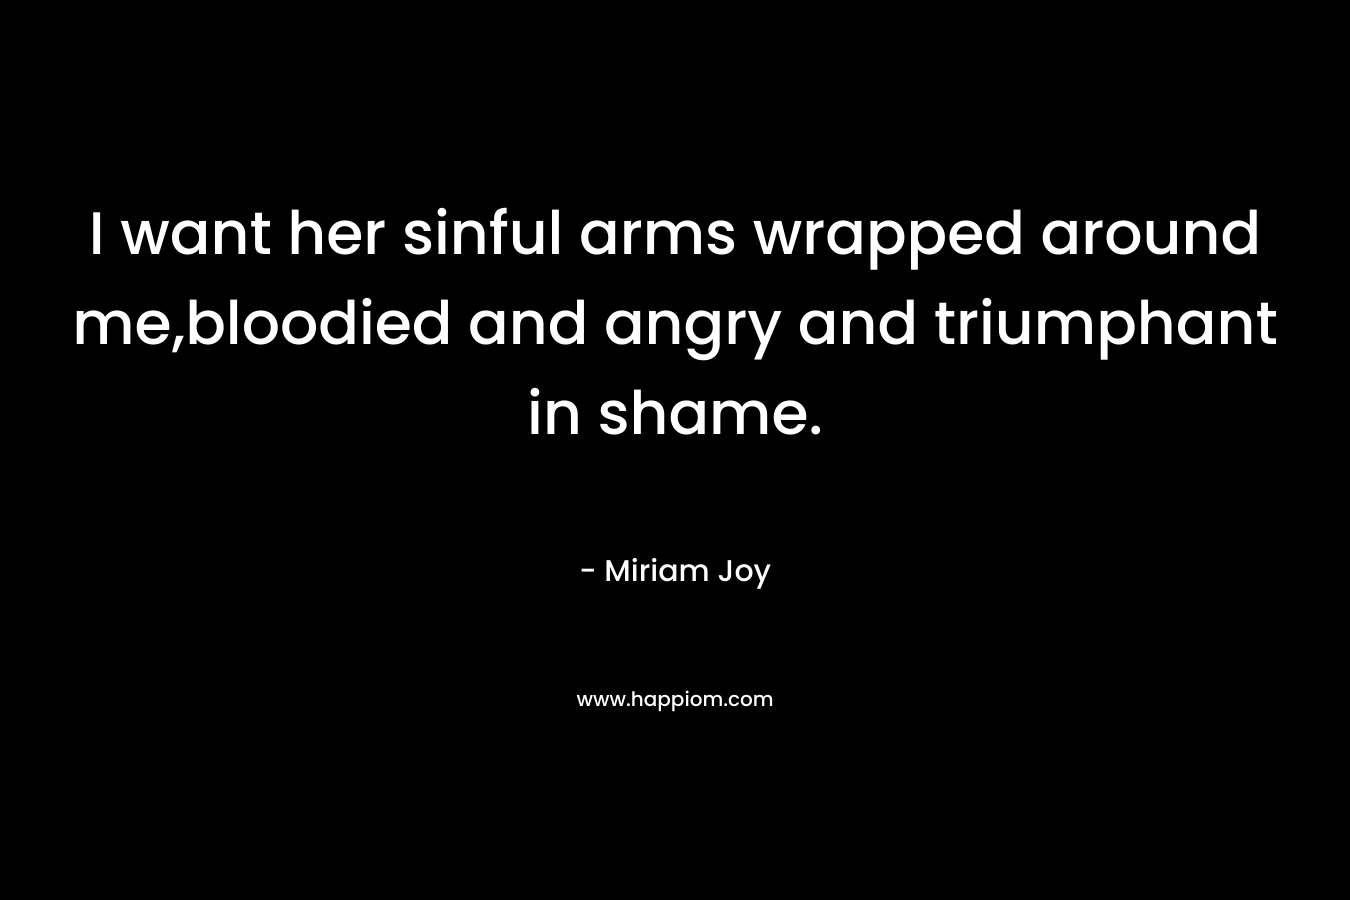 I want her sinful arms wrapped around me,bloodied and angry and triumphant in shame. – Miriam Joy